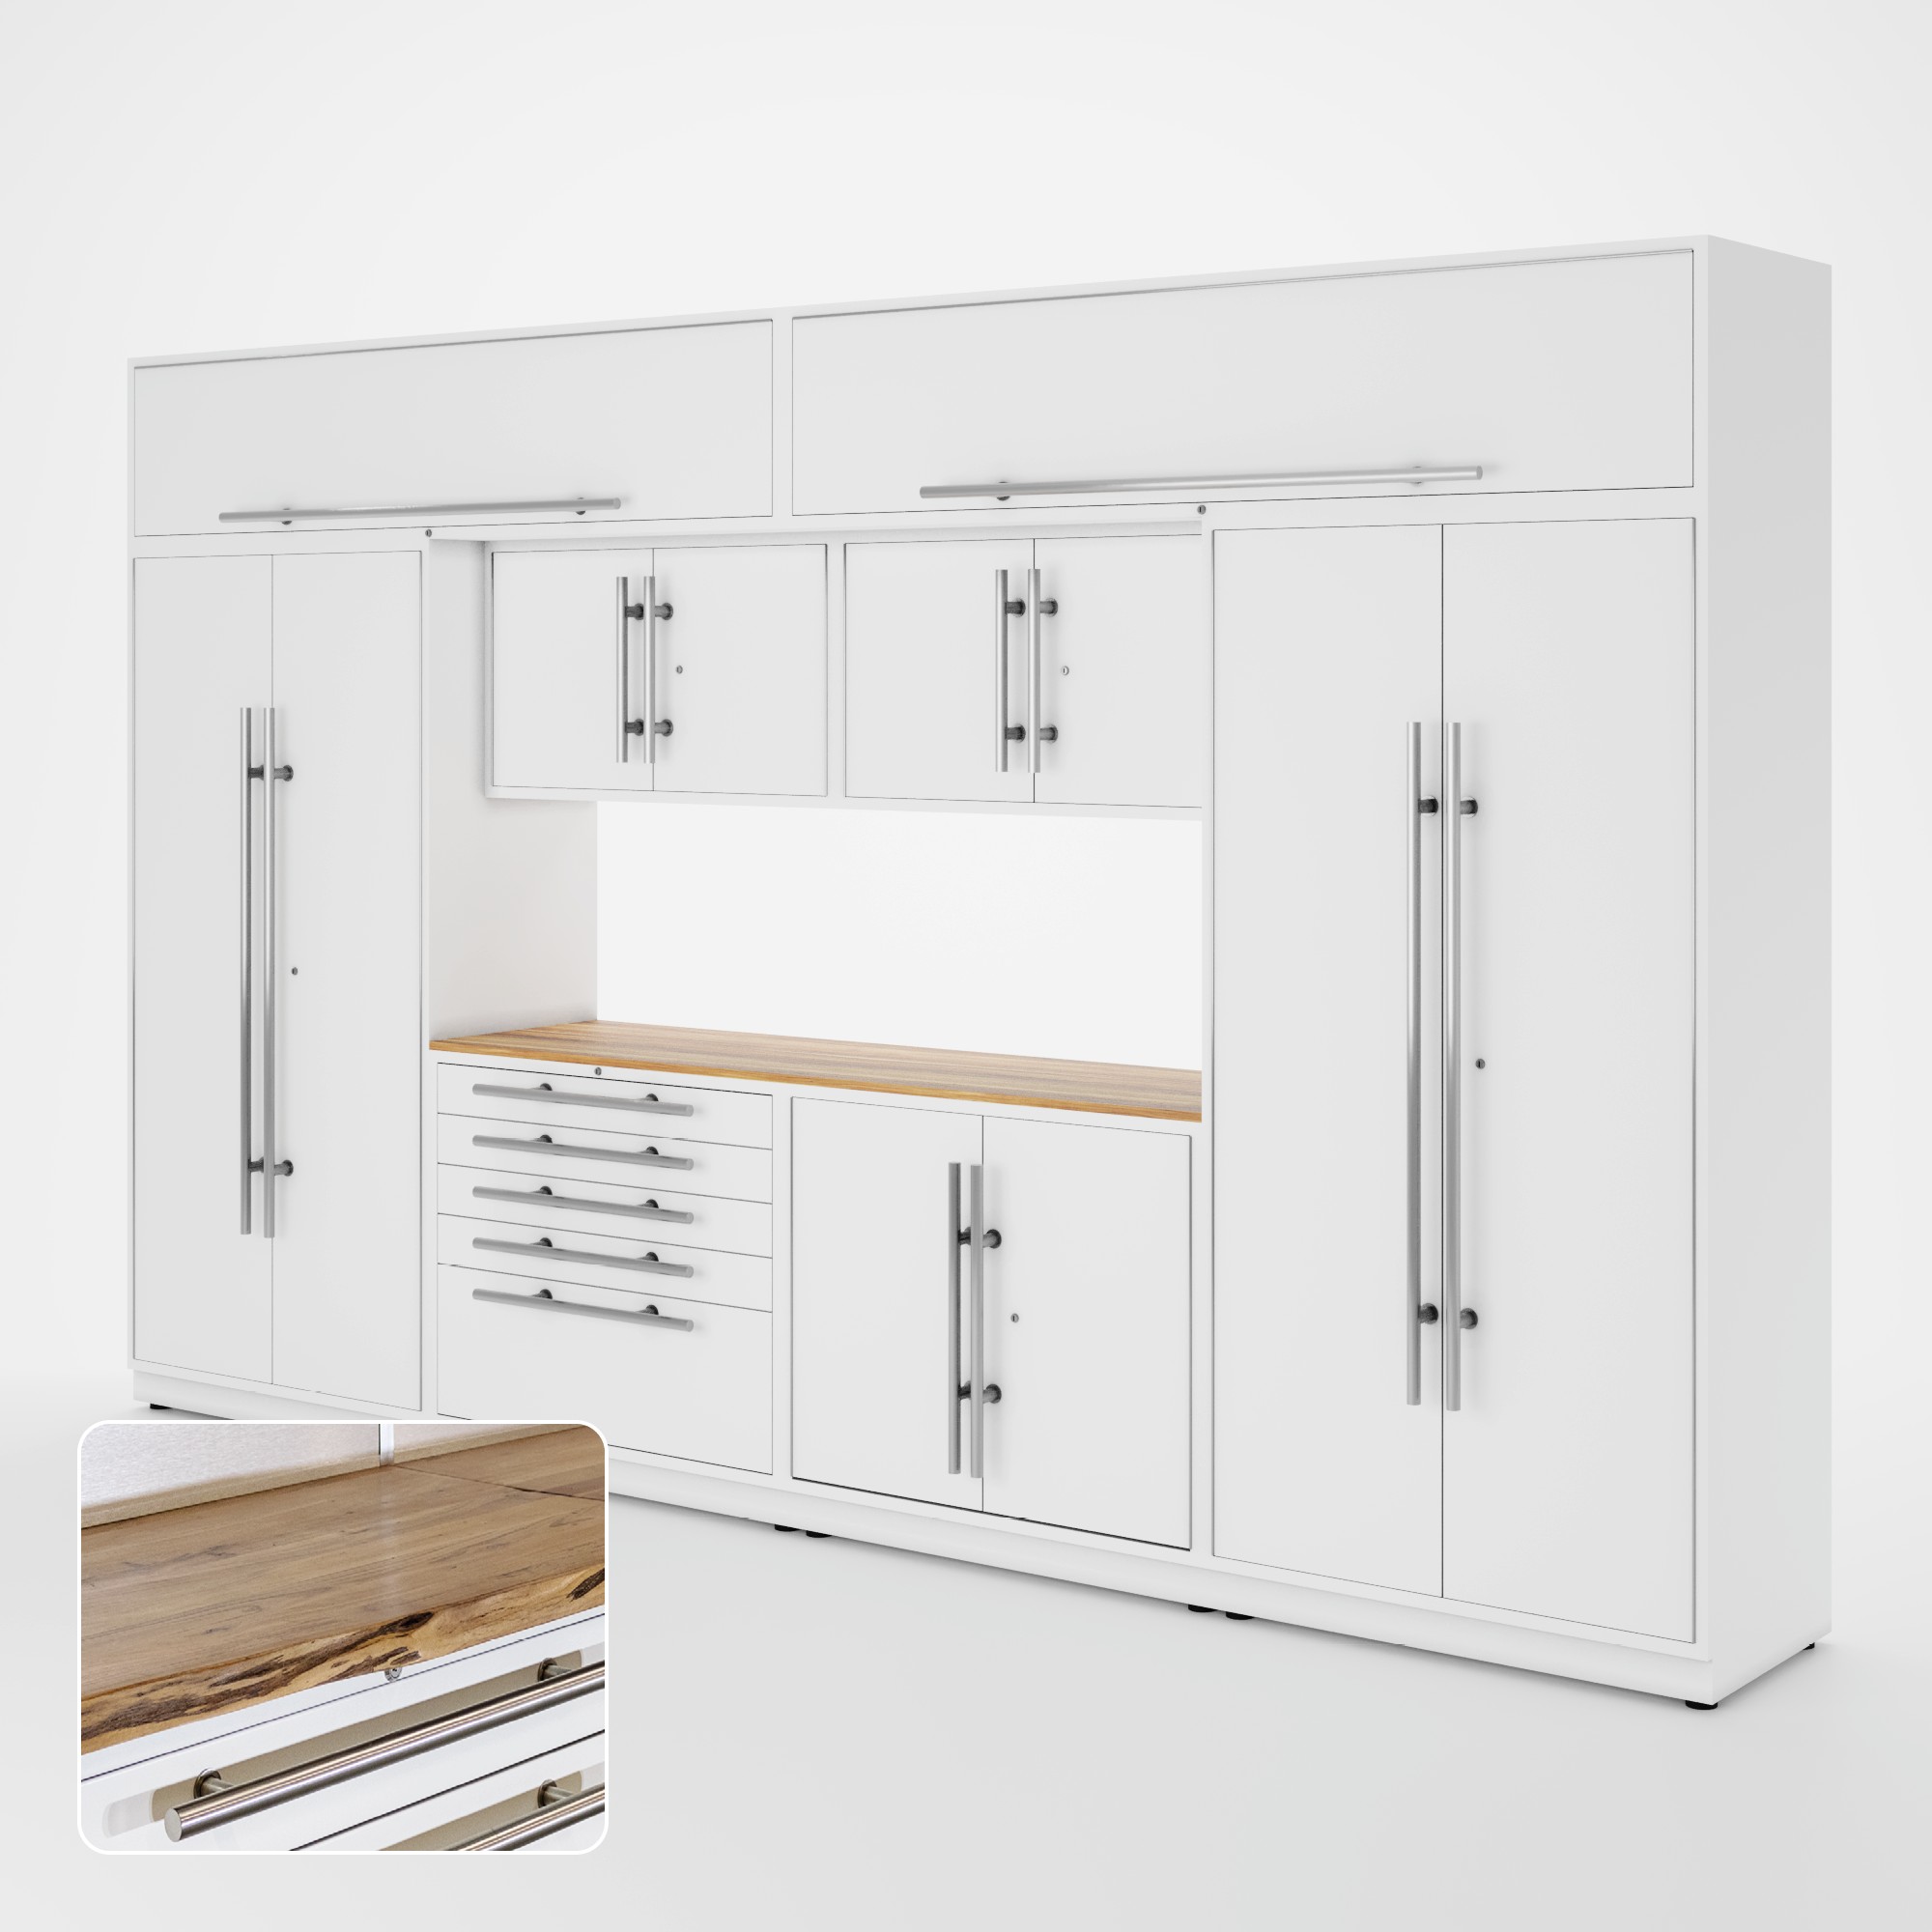 LUX Cabinets – 13 ft set – MAX – Overheads